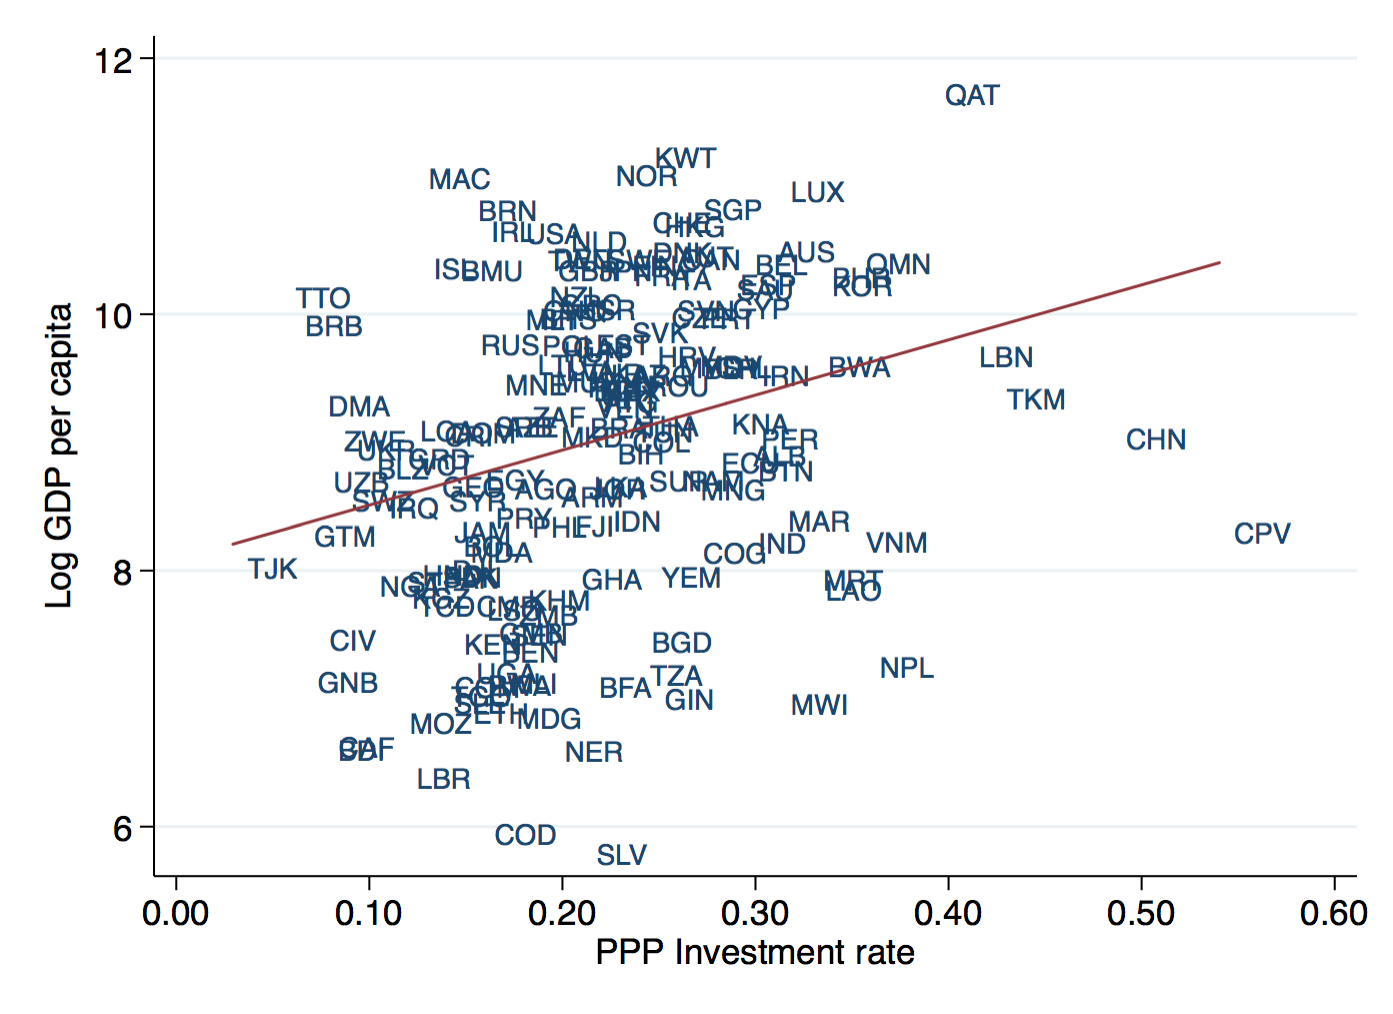 Investment and GDP per capita